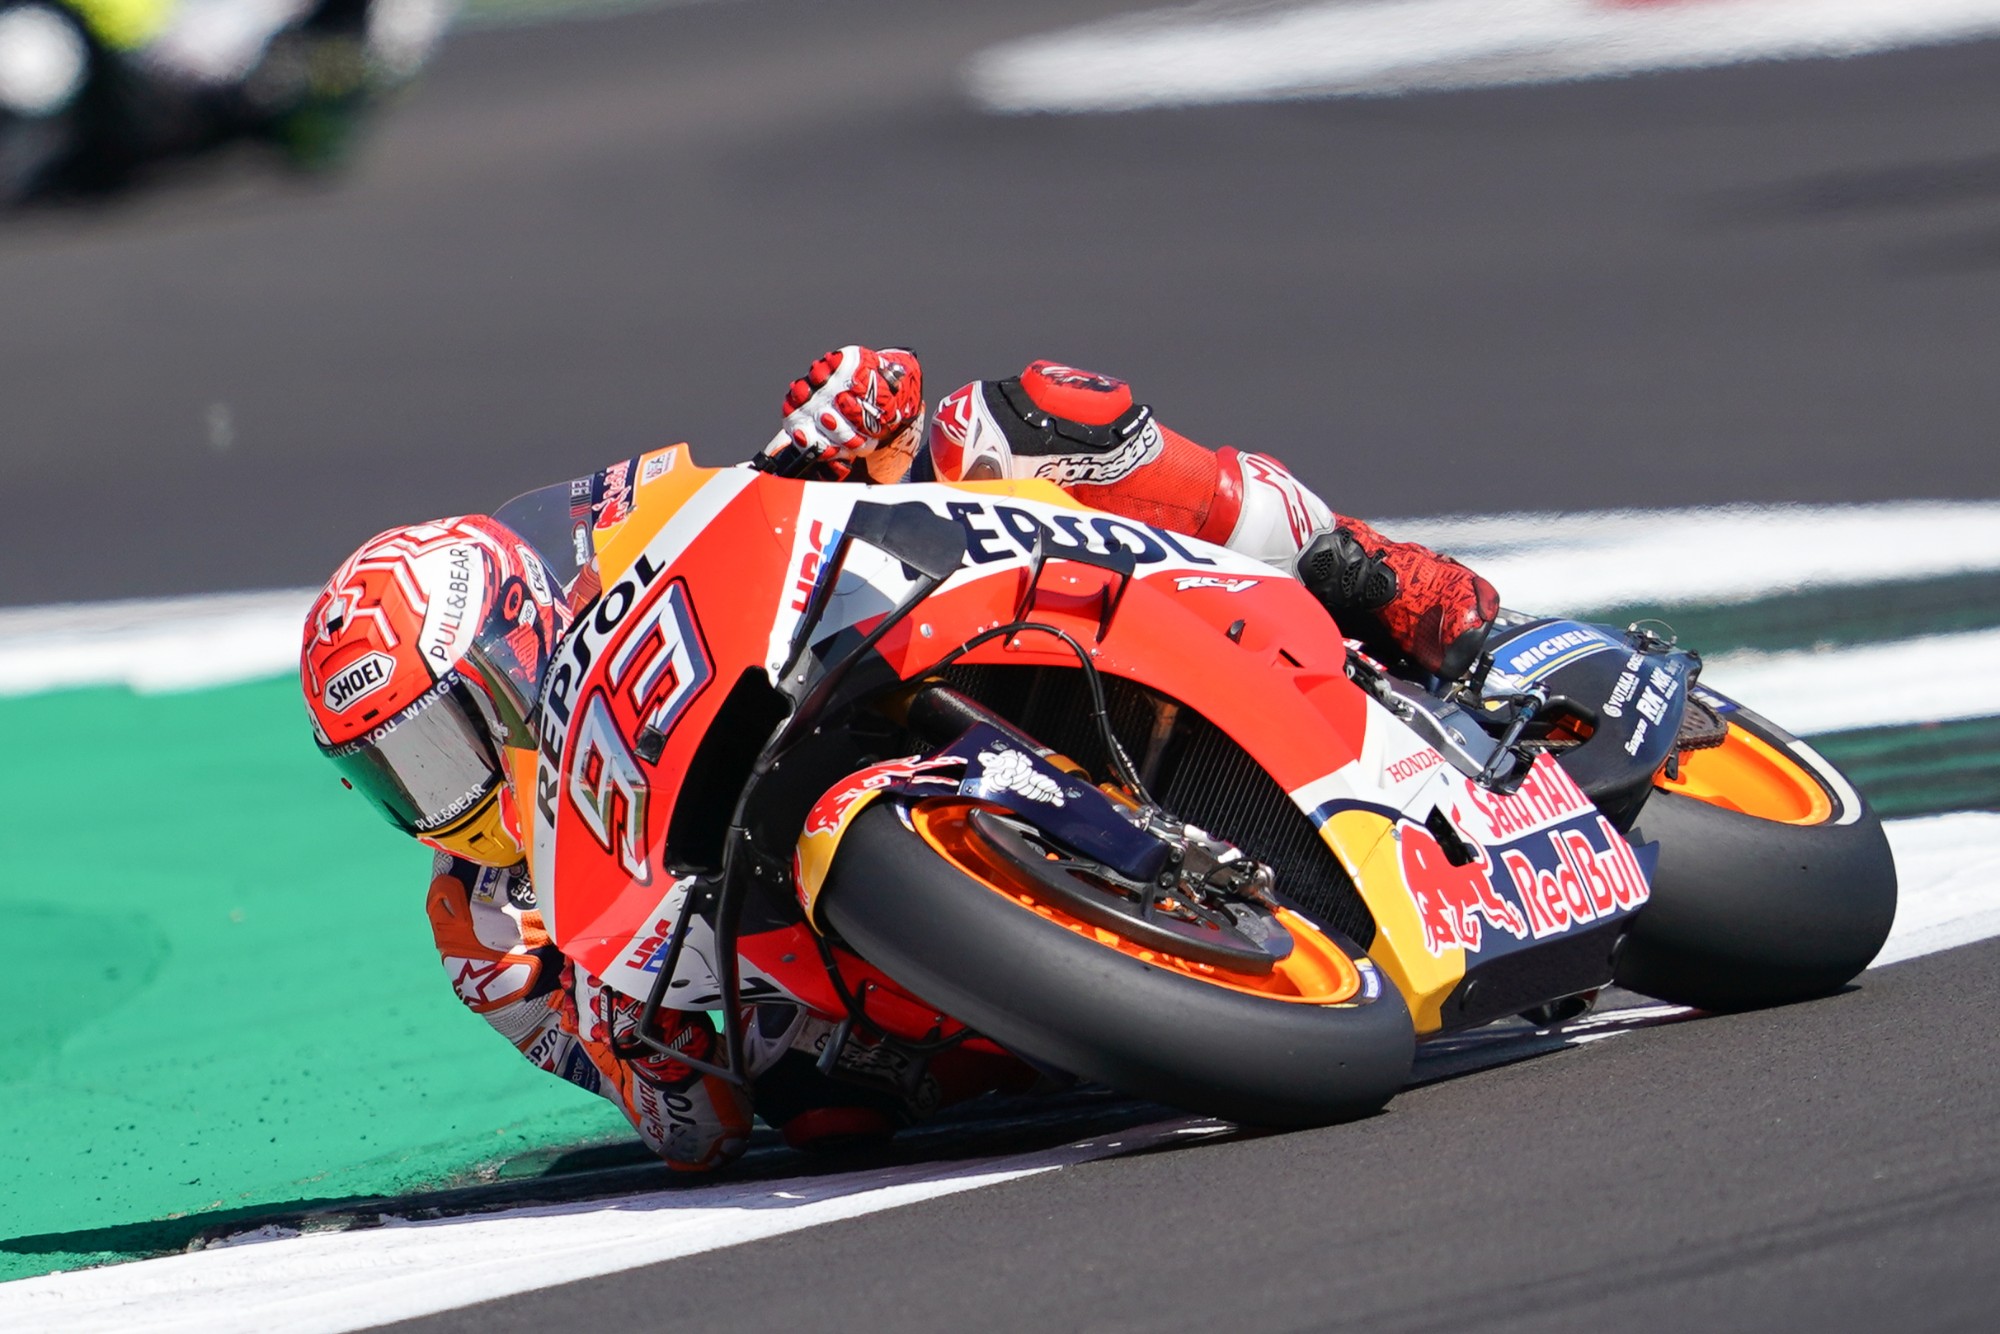 MotoGP Marc Marquez Claims Pole Position With New Lap Record At Silverstone (Updated)